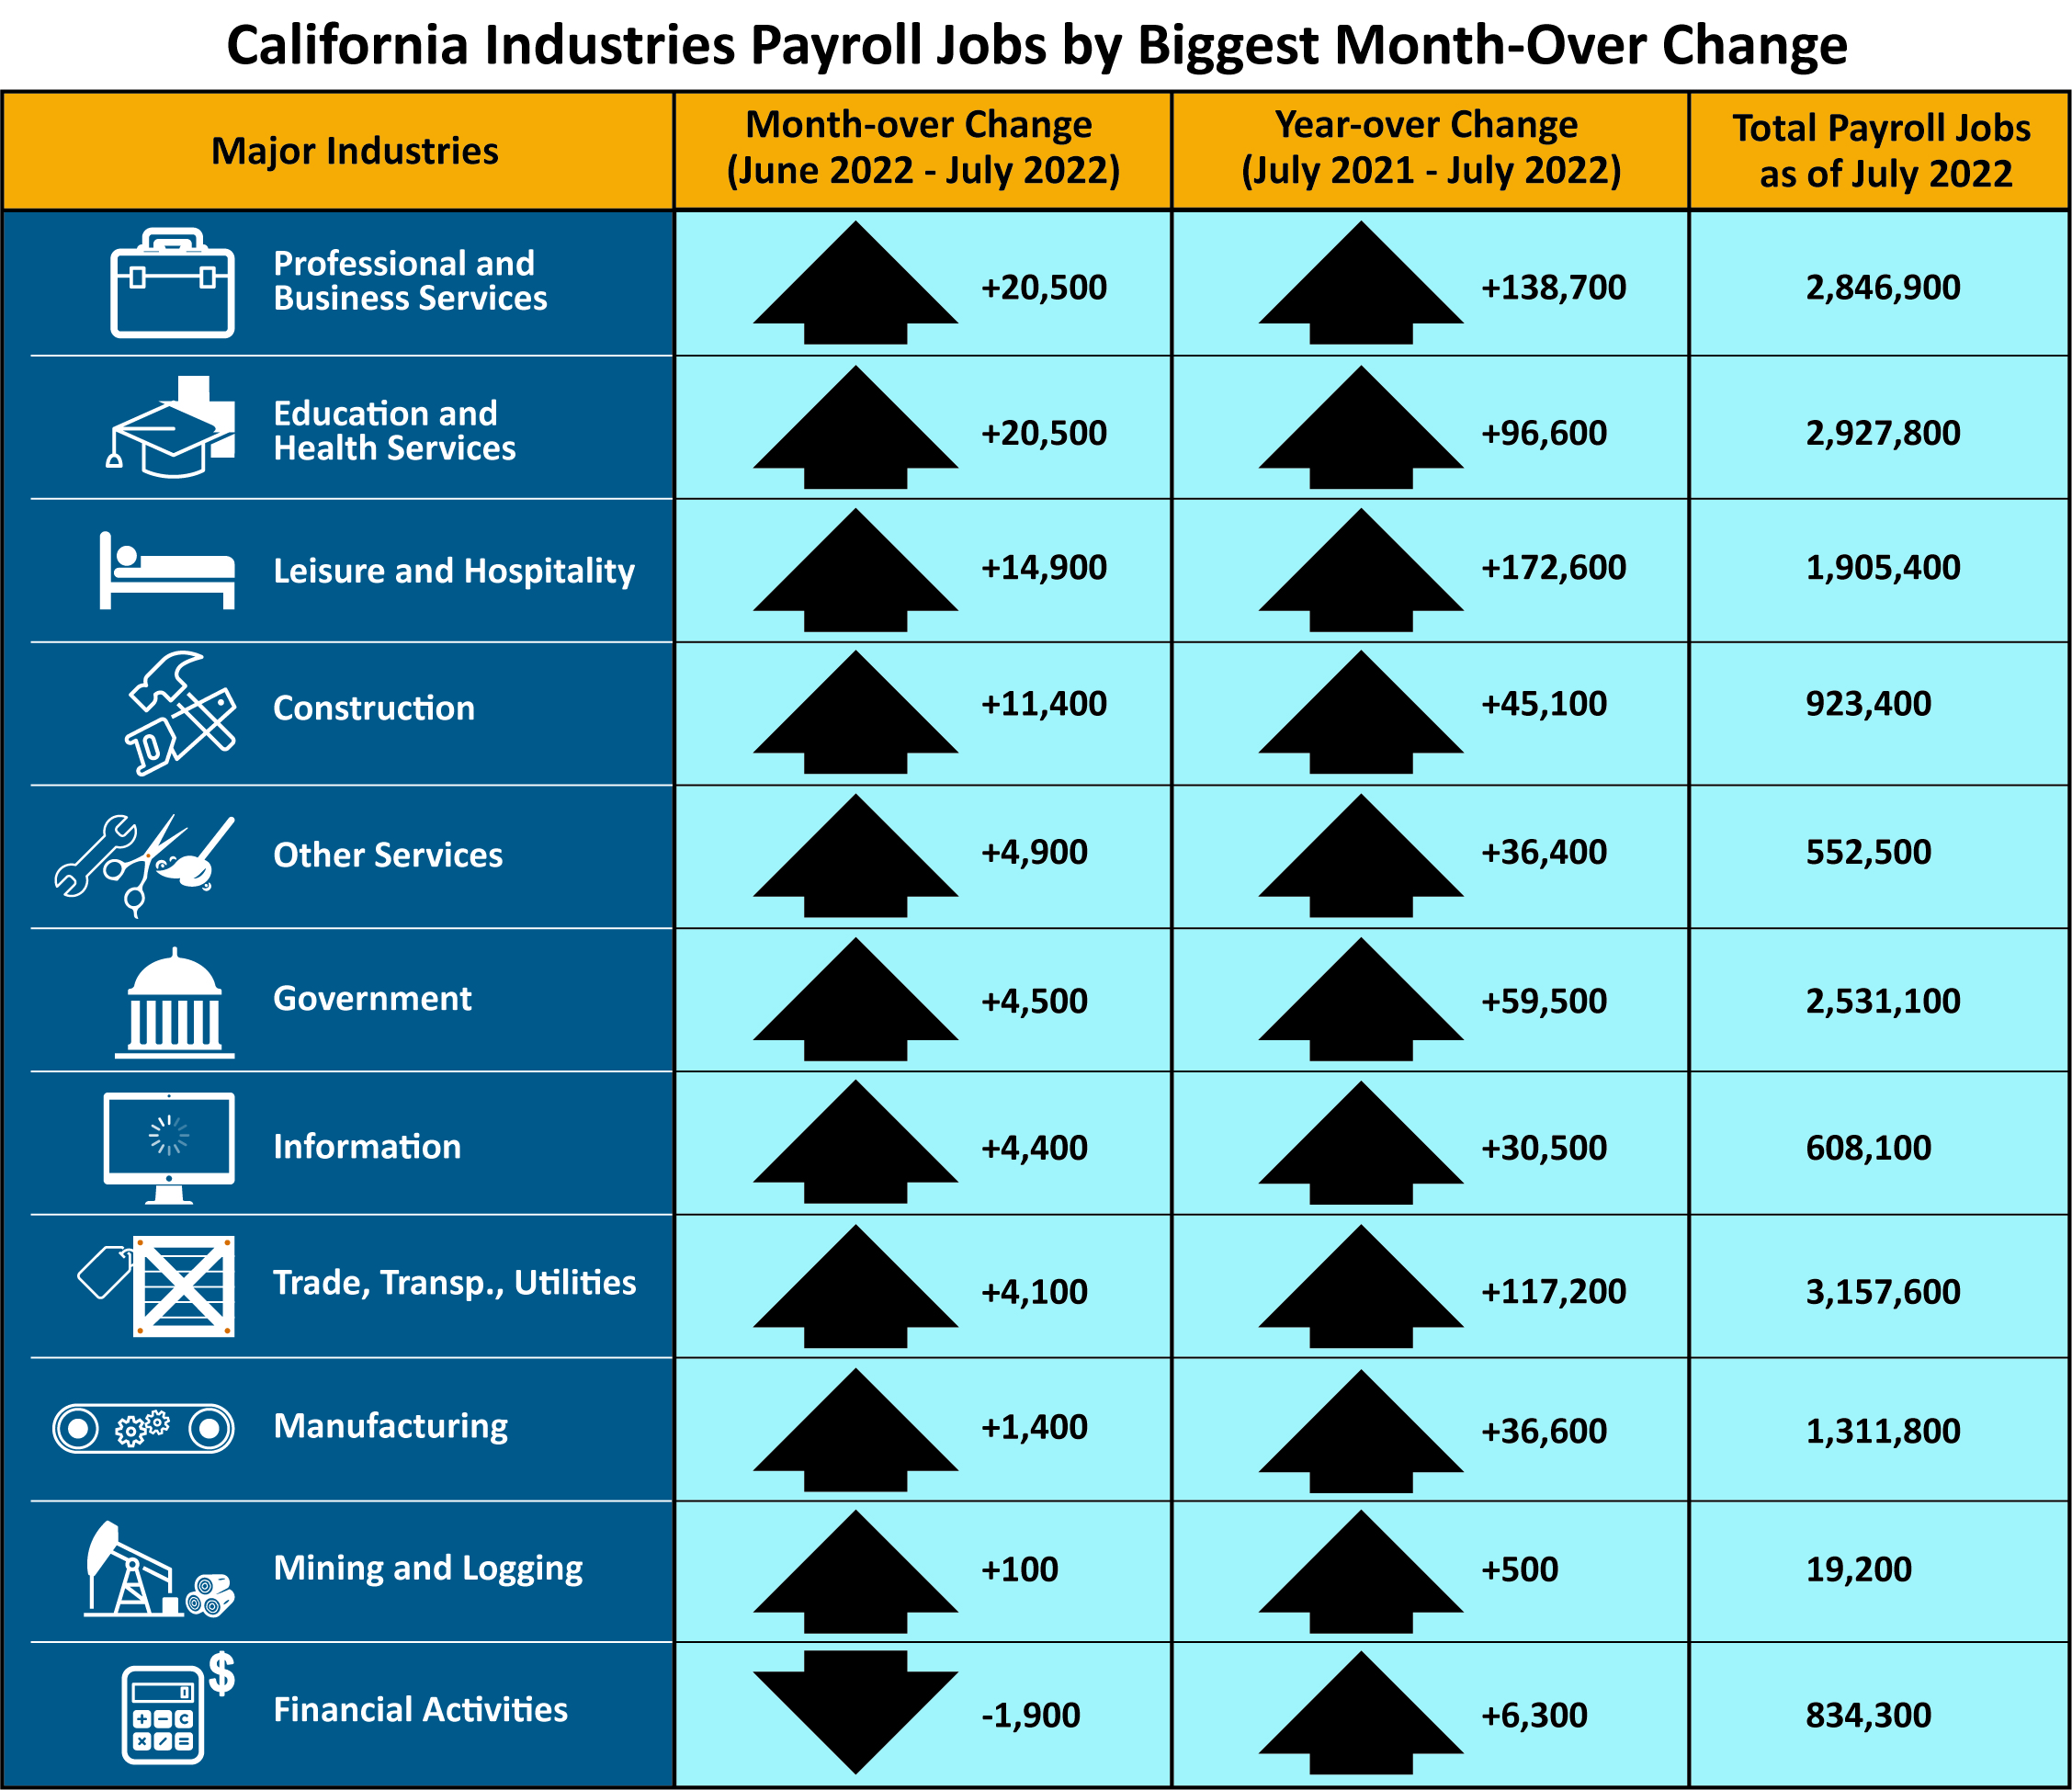 This table shows the number of California nonfarm payroll jobs grouped by major industries, with columns showing month-over and year-over change, plus total payroll jobs as of July 2022. If you need an alternative format to access this information, contact the EDD Equal Employment Opportunity Office at EEOmail@edd.ca.gov or call toll free 1-866-490-8879. 